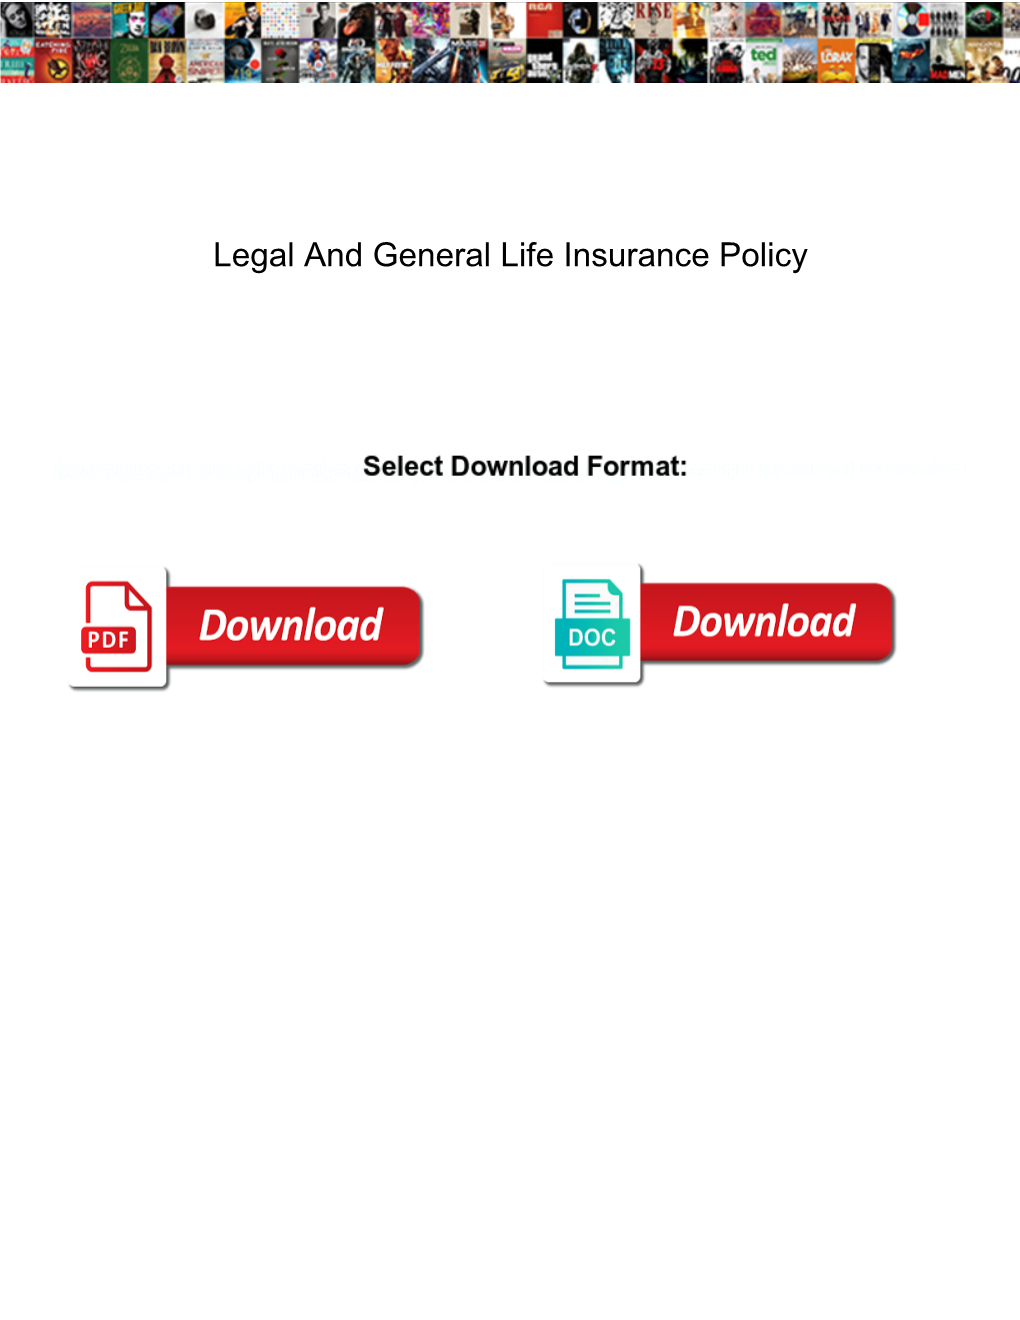 Legal and General Life Insurance Policy